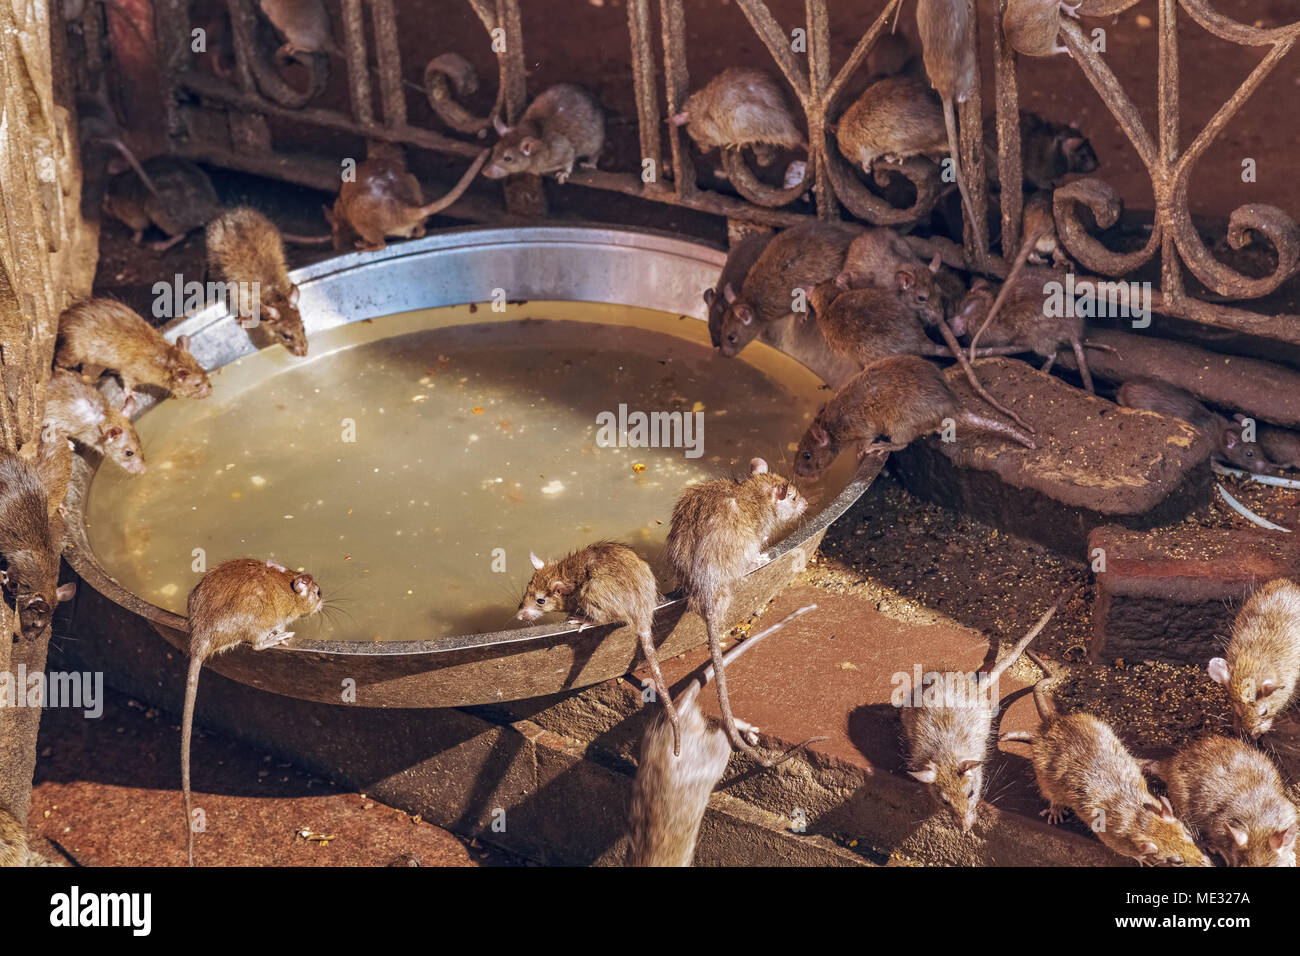 Rats feeding on eatables given by devotees at the Karni Mata temple Bikaner Rajasthan as part of age old rituals and belief. Stock Photo